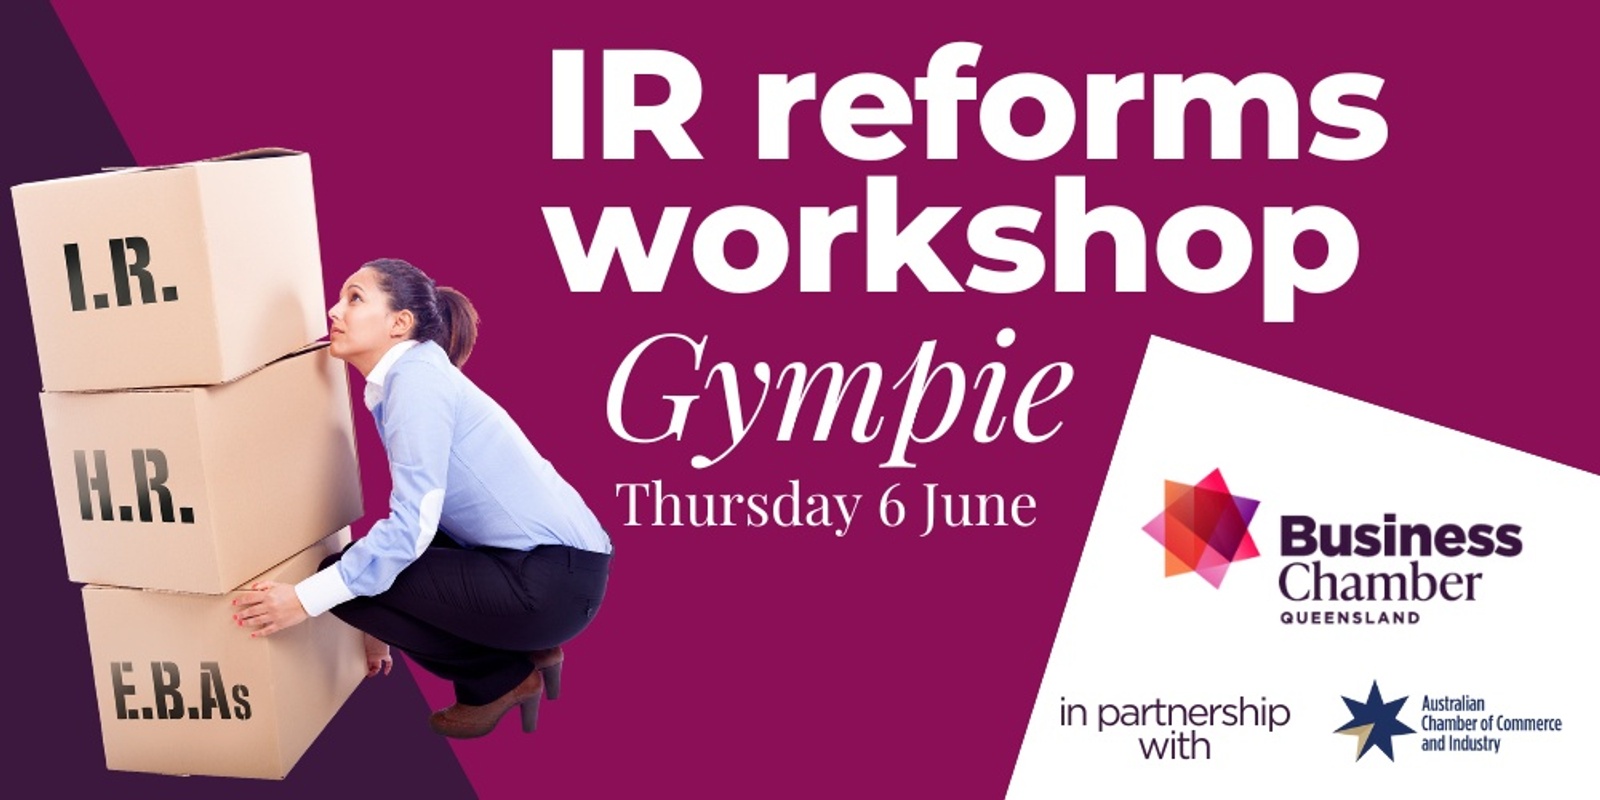 Banner image for IR reforms workshop, Gympie